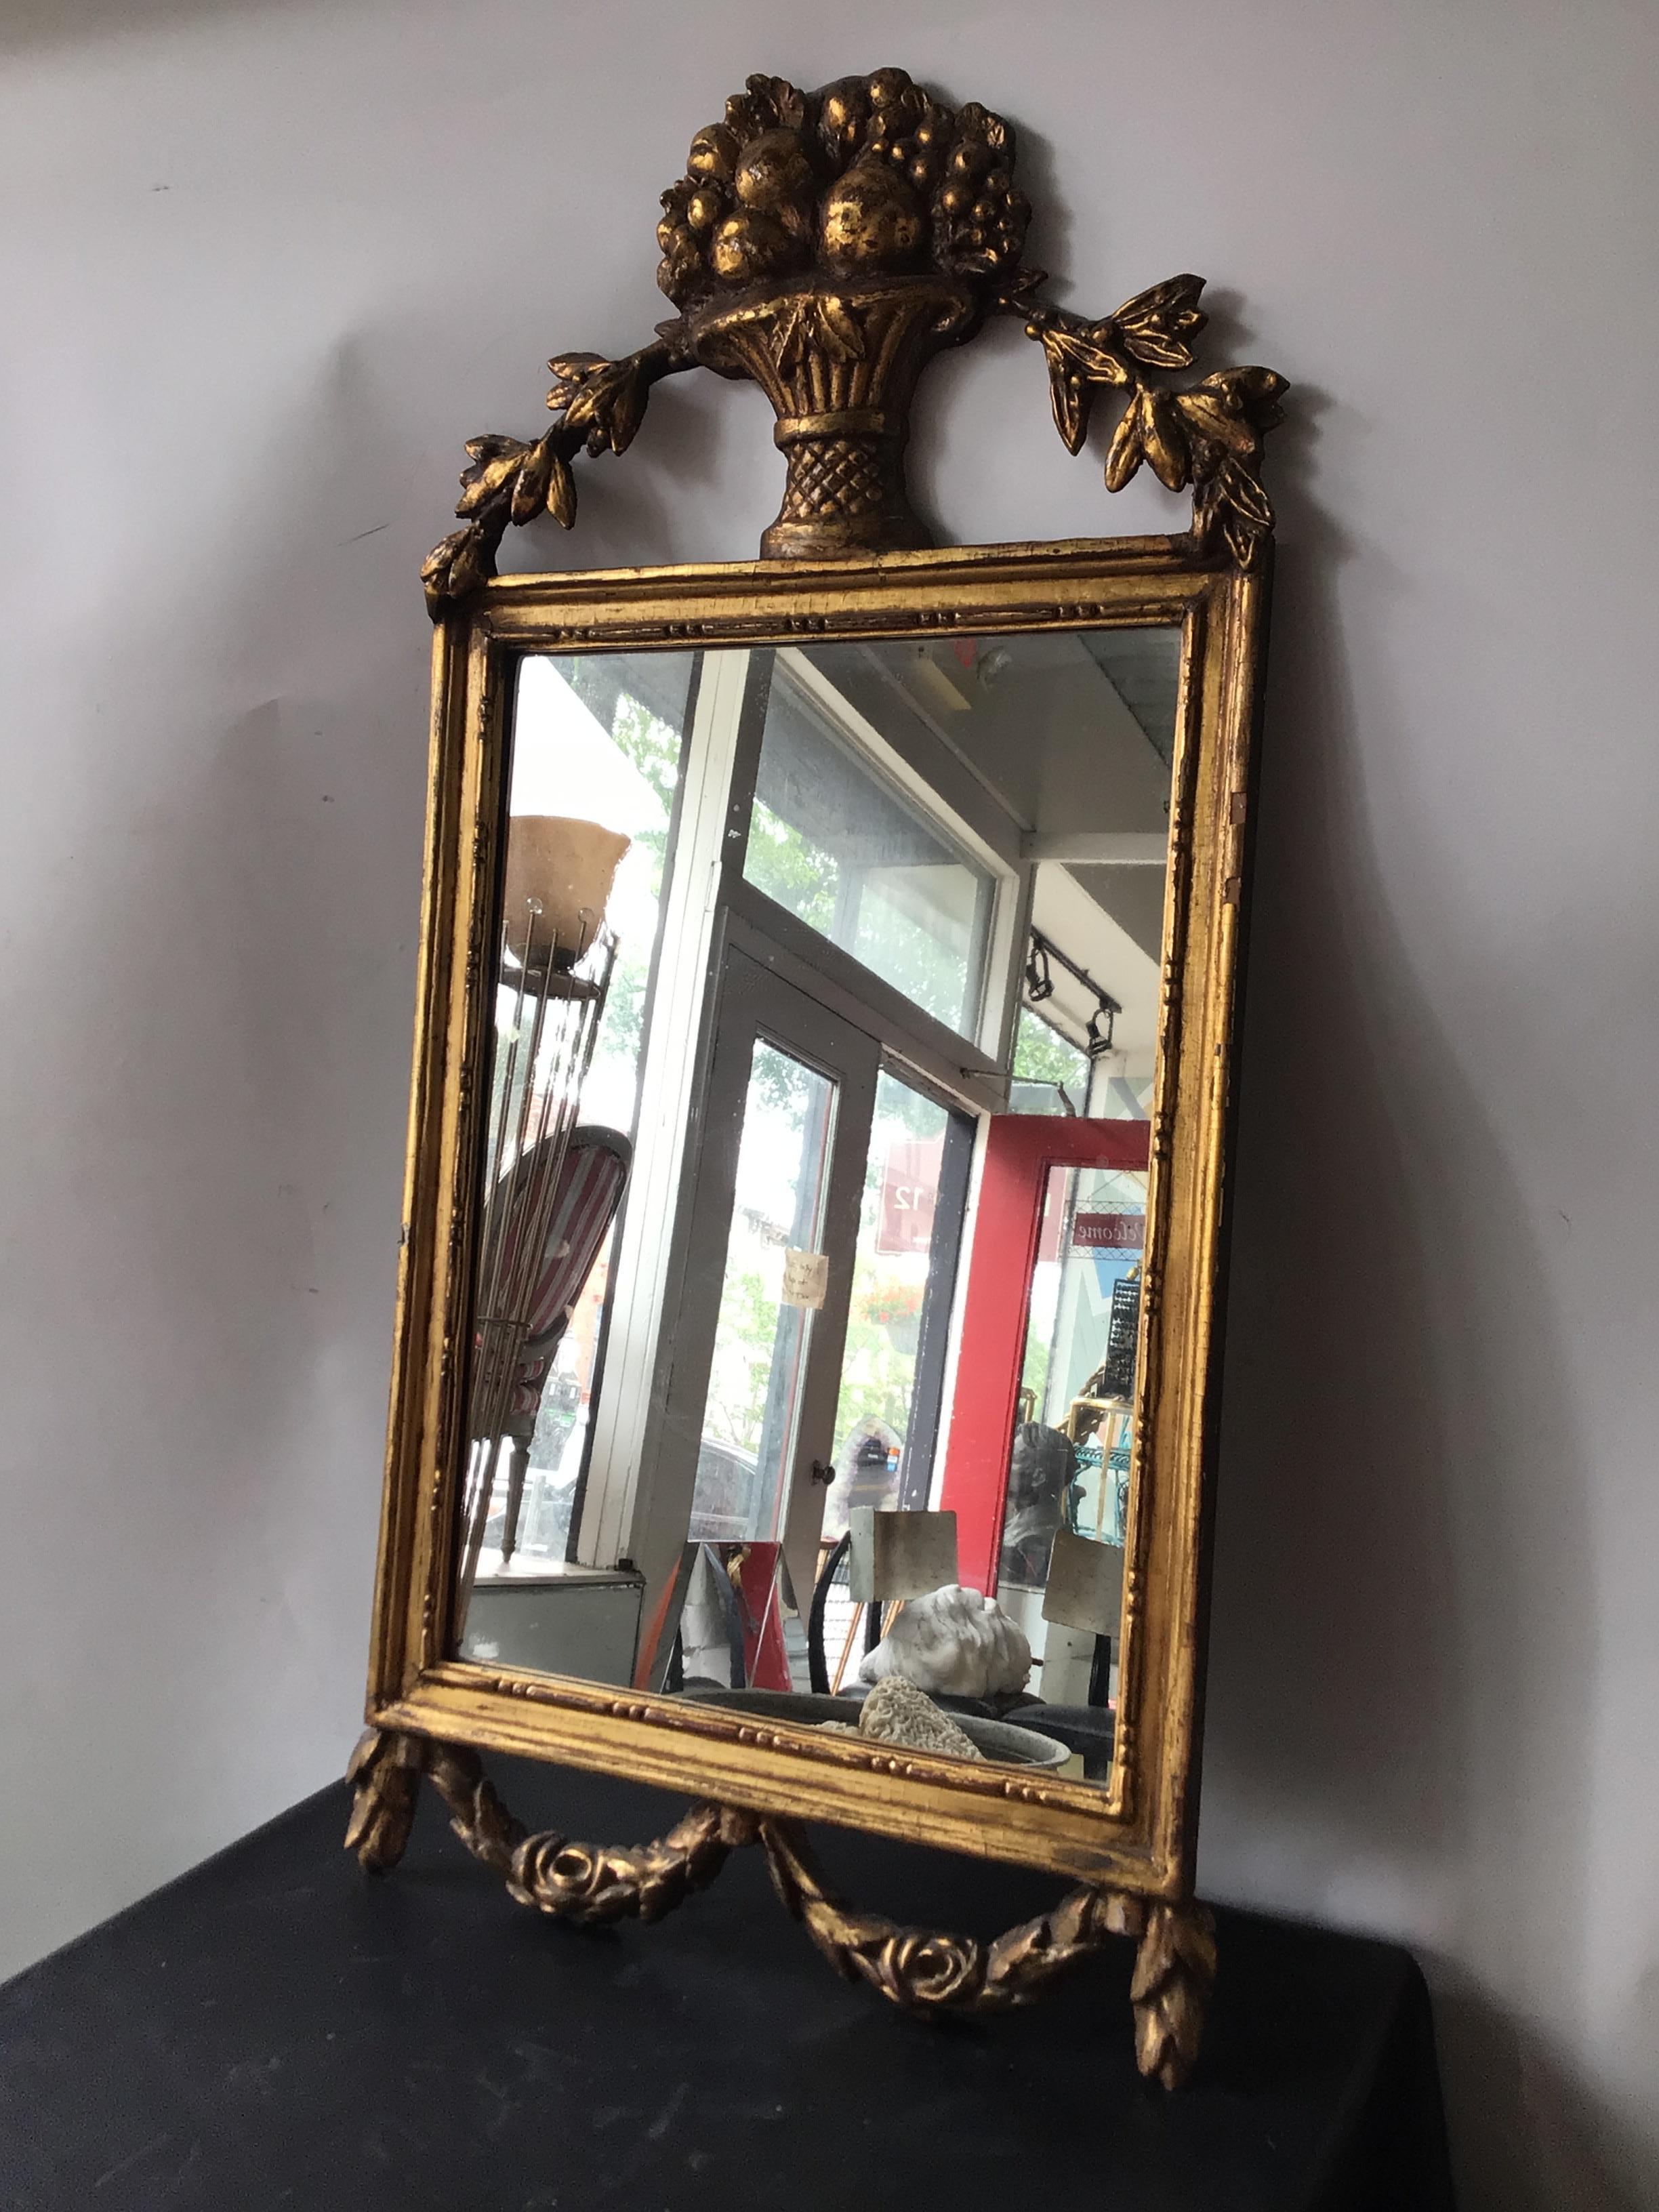 1870s French hand carved gilt wood mirror adorned with basket of flowers.